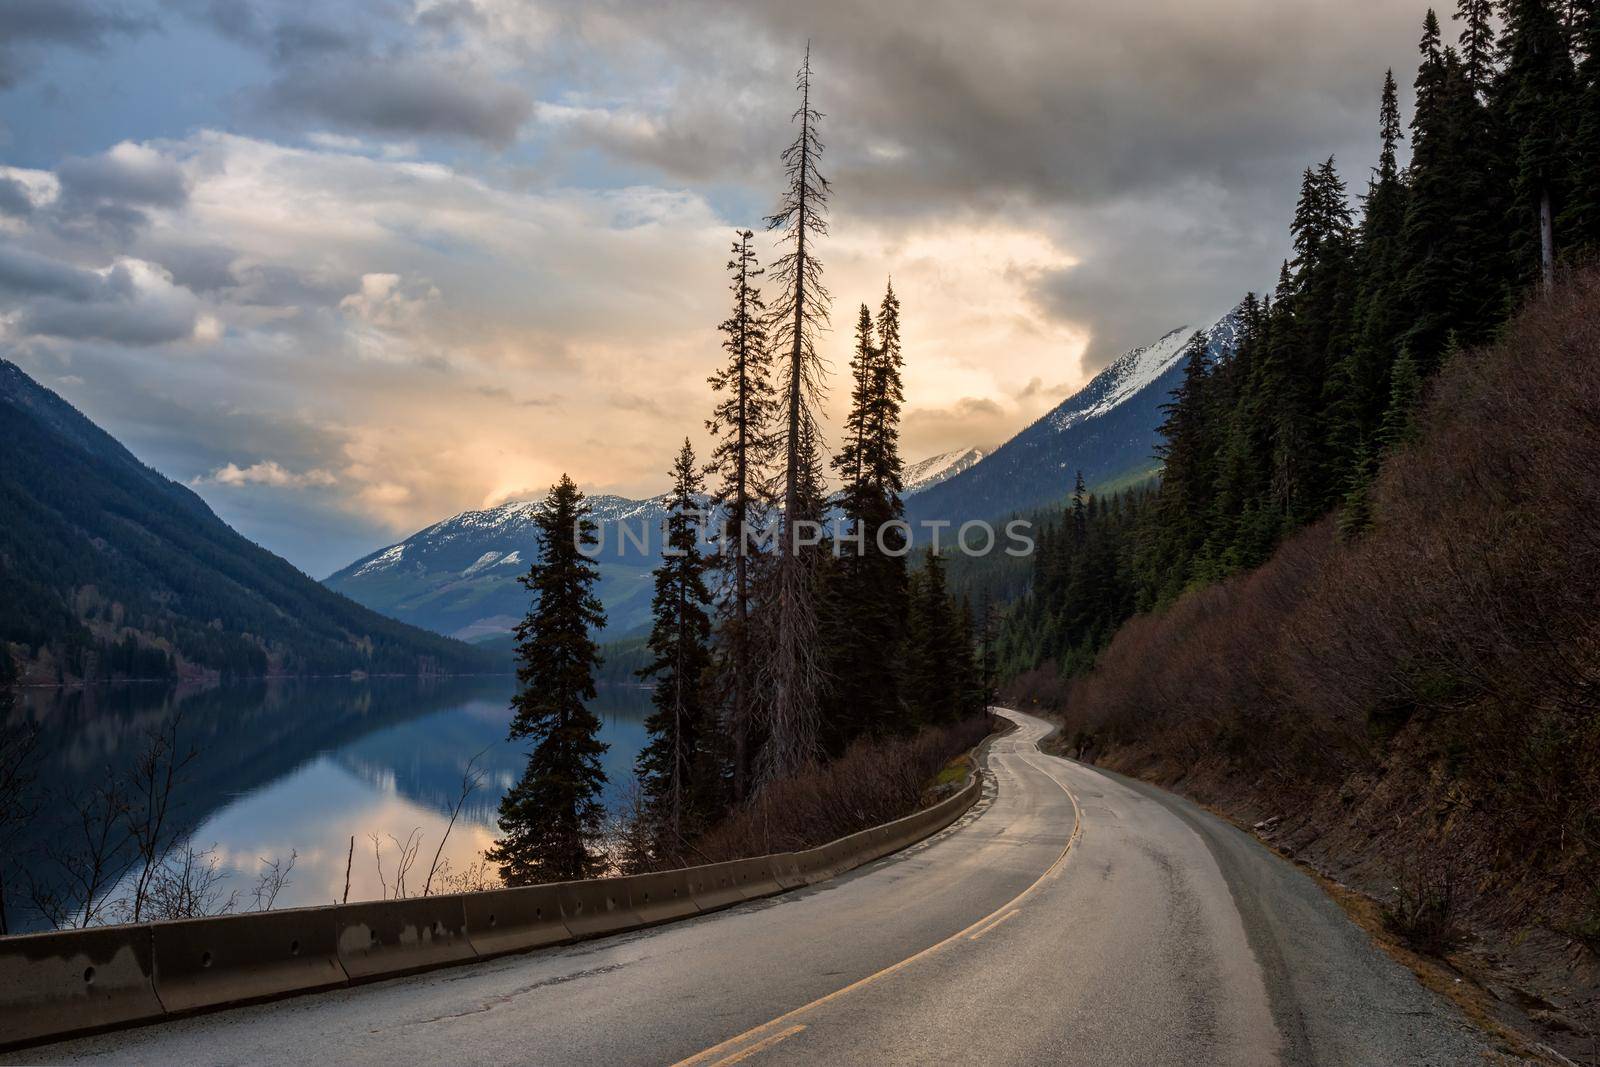 Scenic road by the lake and mountains during a cloudy sunset by edb3_16